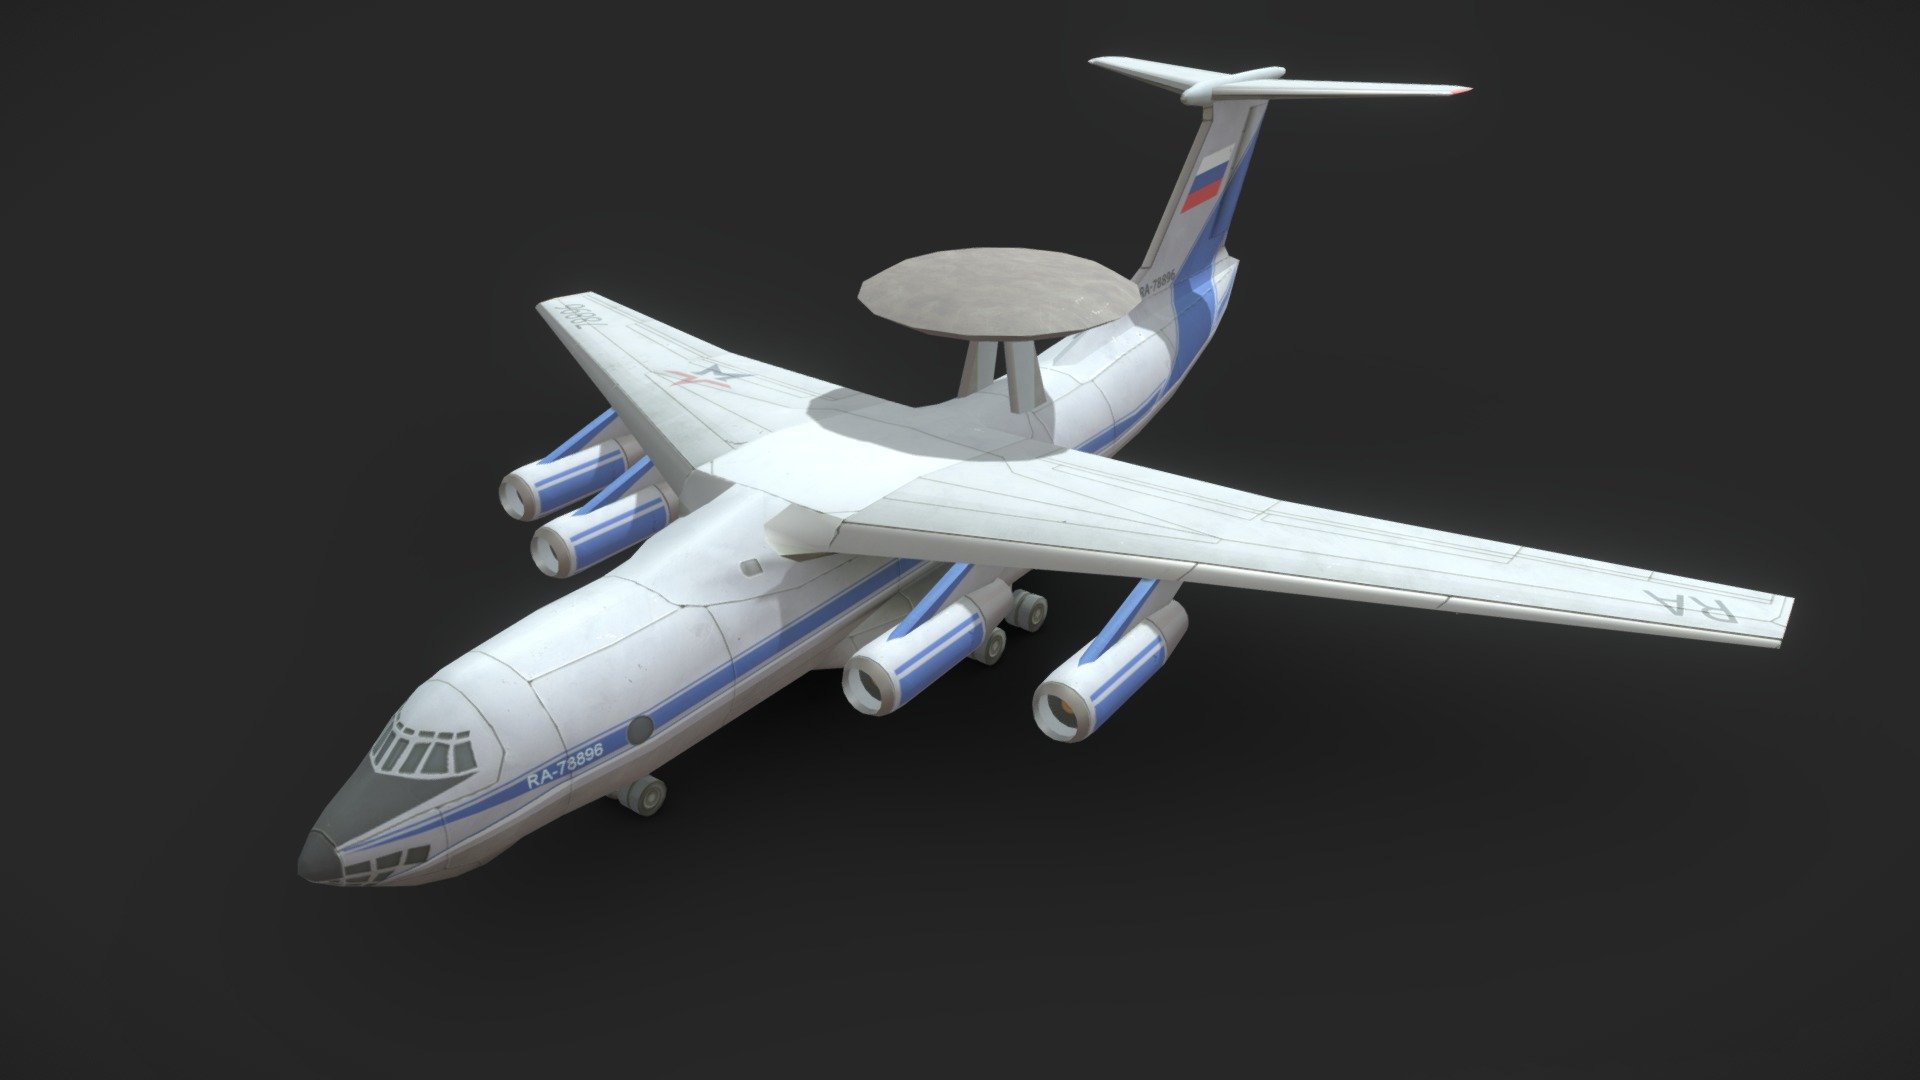 Low-poly model of a Soviet/Russian cargo plane Il-76 (NATO reporting name: Candid, Russian: Ил-76, А-50.) created in 2014 for an RTS game. 
This model contains mesh that can be used both for a normal Il-76 &ldquo;Candid